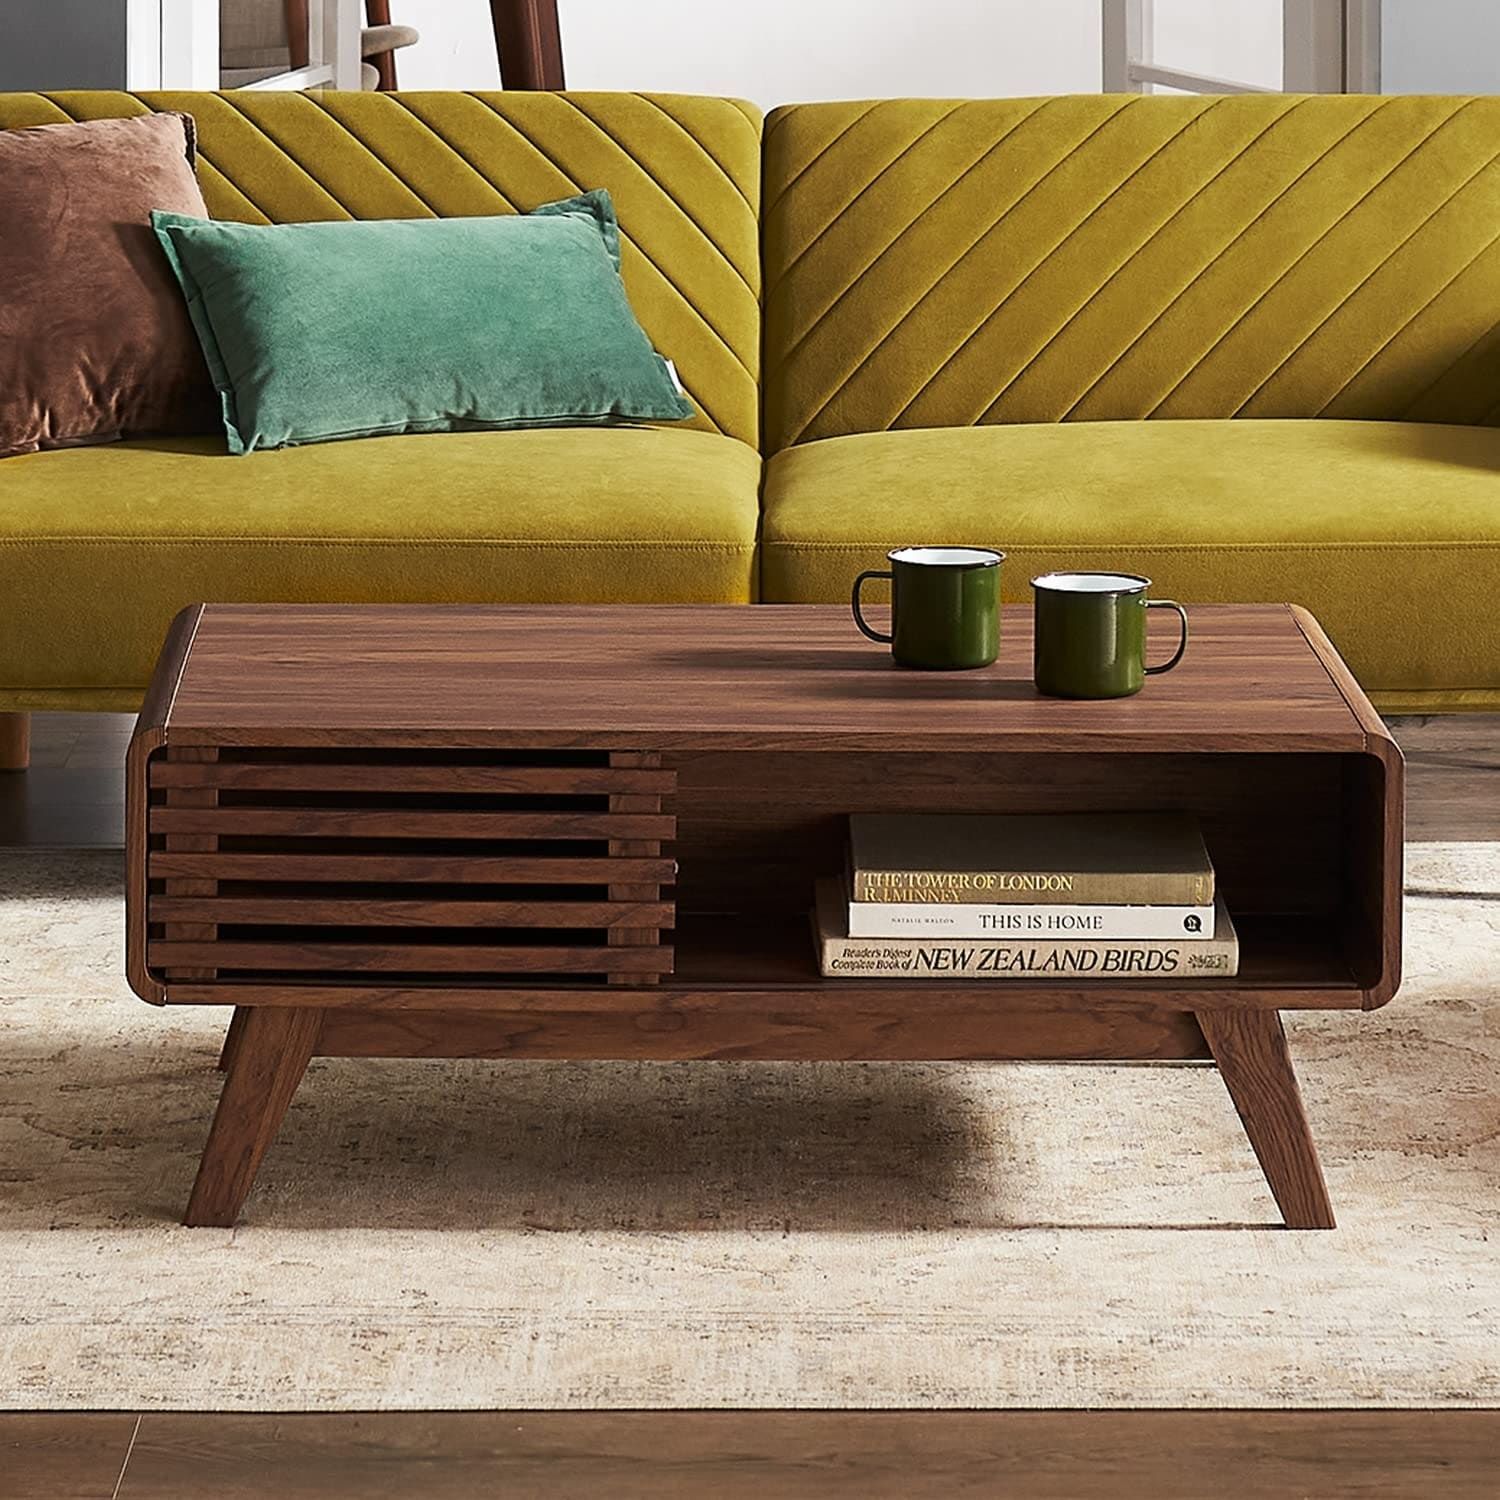 Mopio Ensley Mid Century Modern Coffee Table With Dual Side Storage,  Centerpiece For Your Living Room – On Sale – Bed Bath & Beyond – 35279177 Throughout Wooden Mid Century Coffee Tables (View 14 of 15)